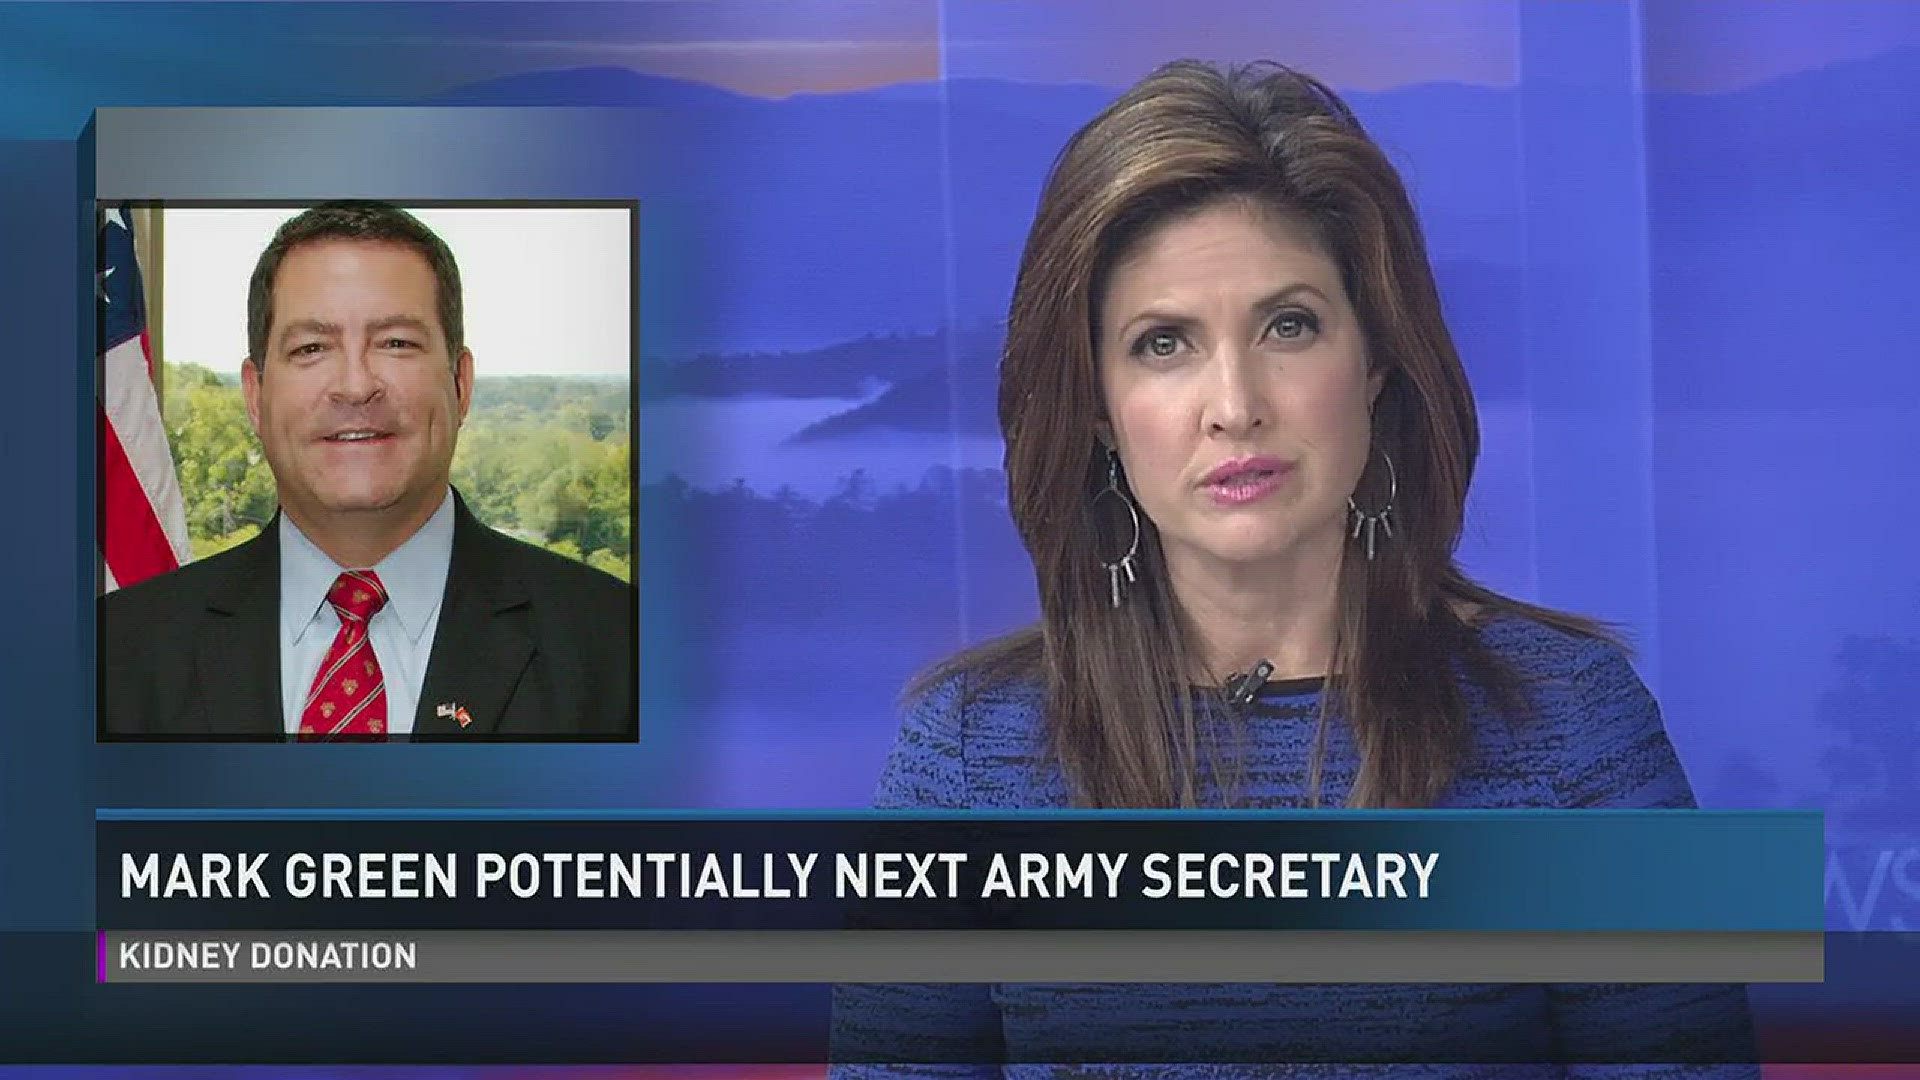 March 15, 2017: Tennessee state Sen. Mark Green is being considered as President Trump's pick for U.S. Secretary of the Army.